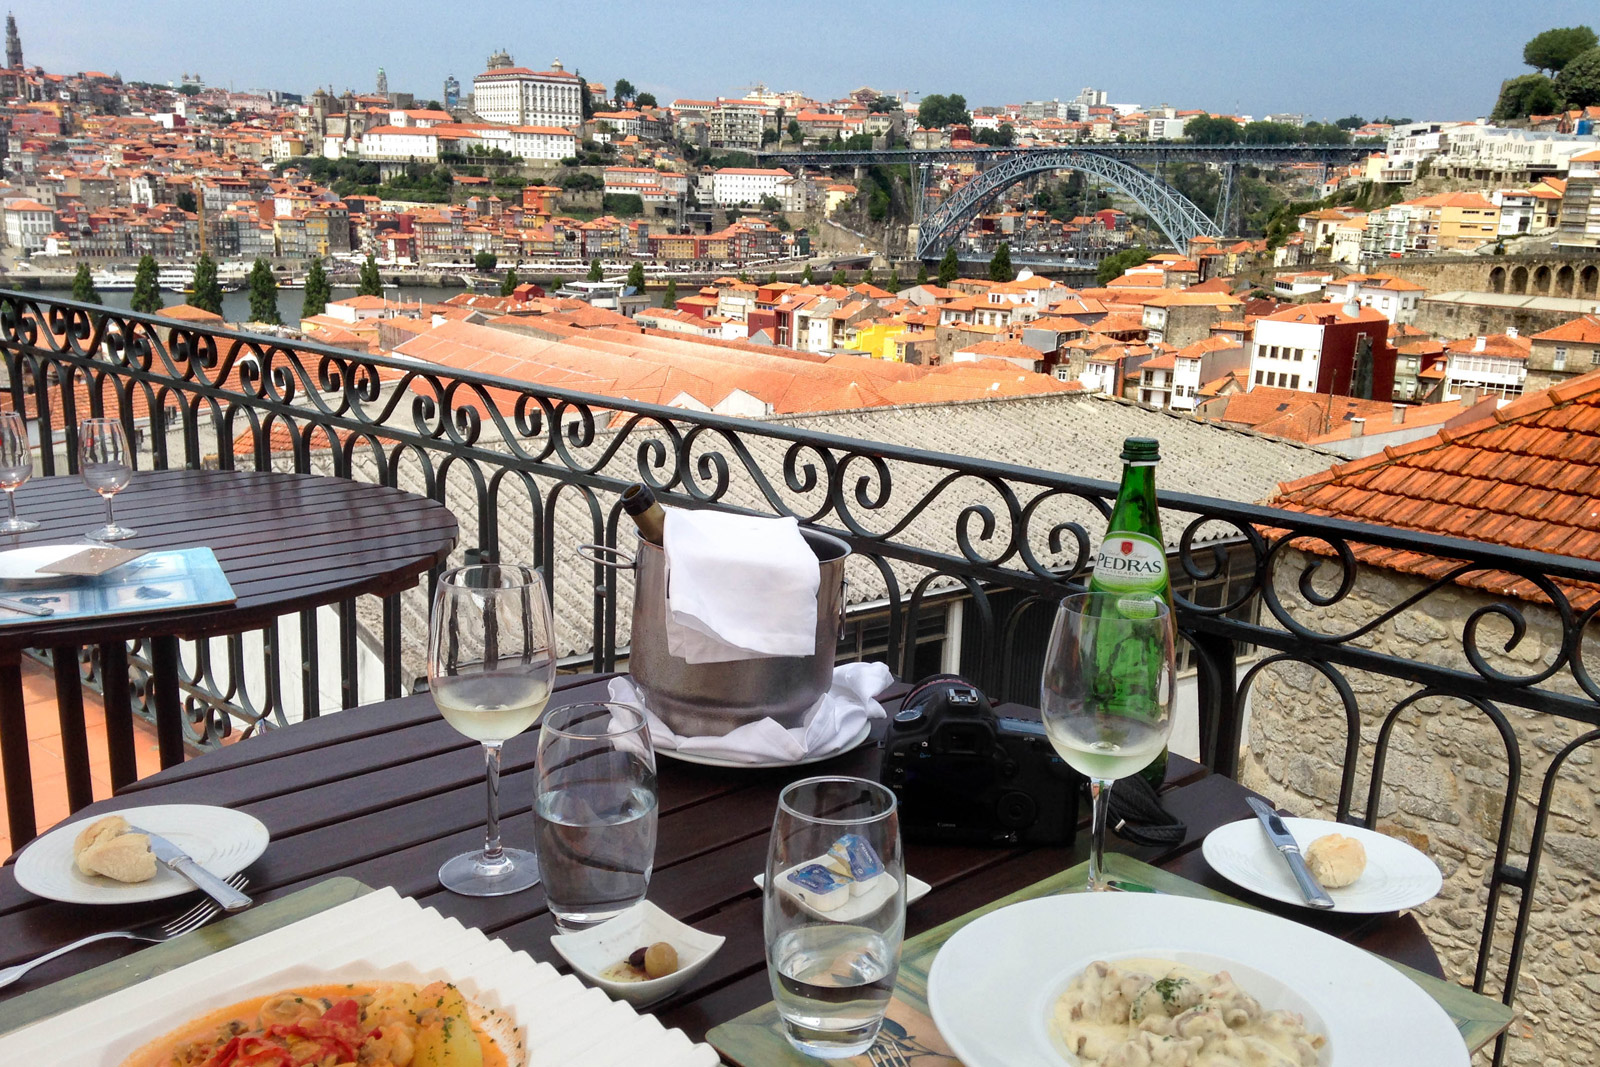 Lunch on a rooftop terrace overlooking Porto